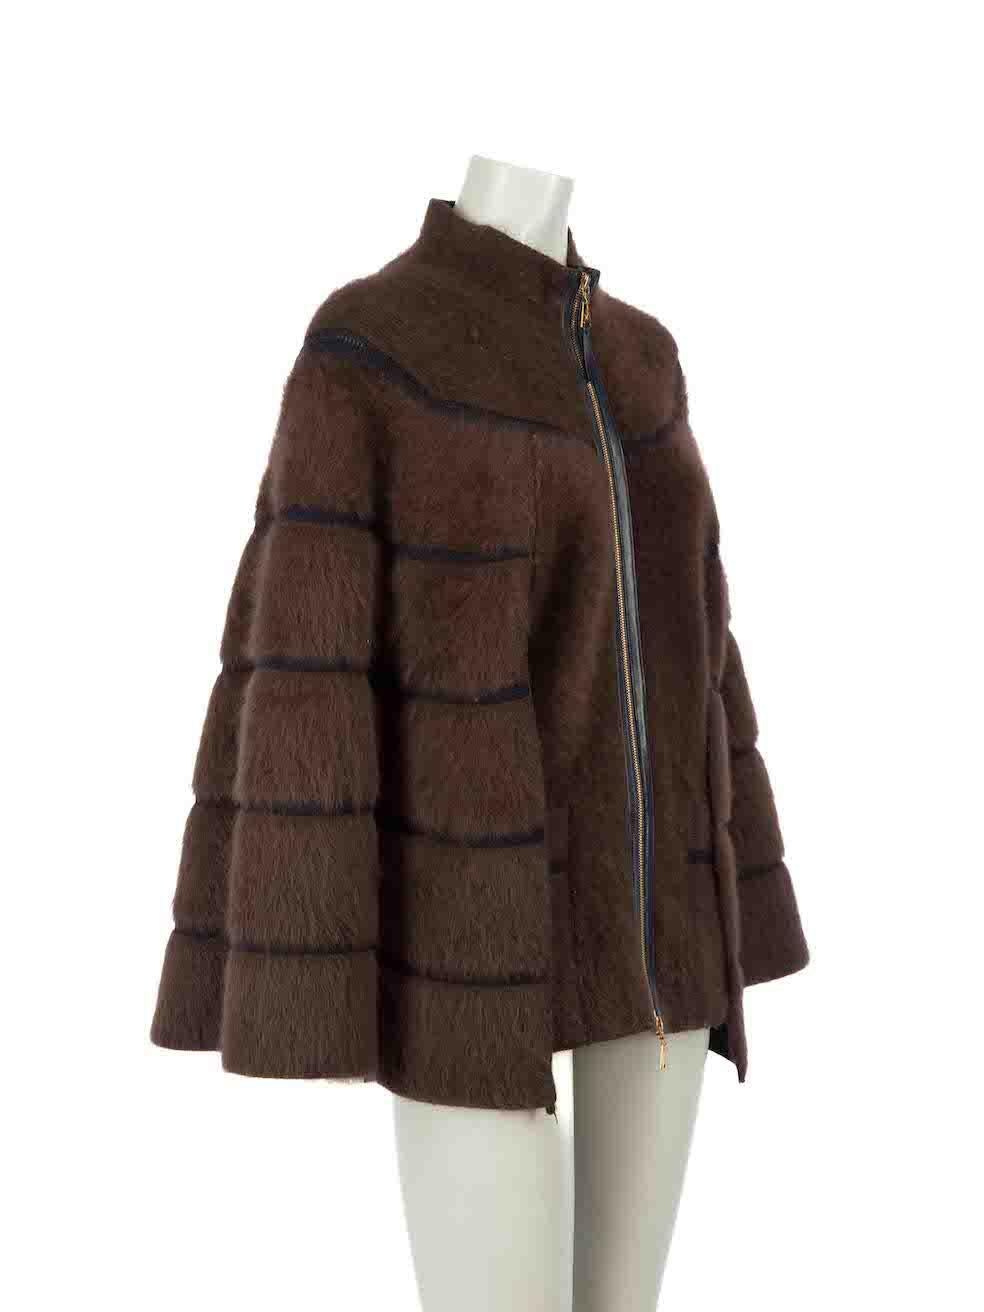 CONDITION is Very good. Minimal wear to coat is evident. Minor pilling to overall wool material especially to the edges. The zip hardware is slightly tarnished on this used Louis Vuitton designer resale item.
 
Details
Brown
Wool
Cape
Striped